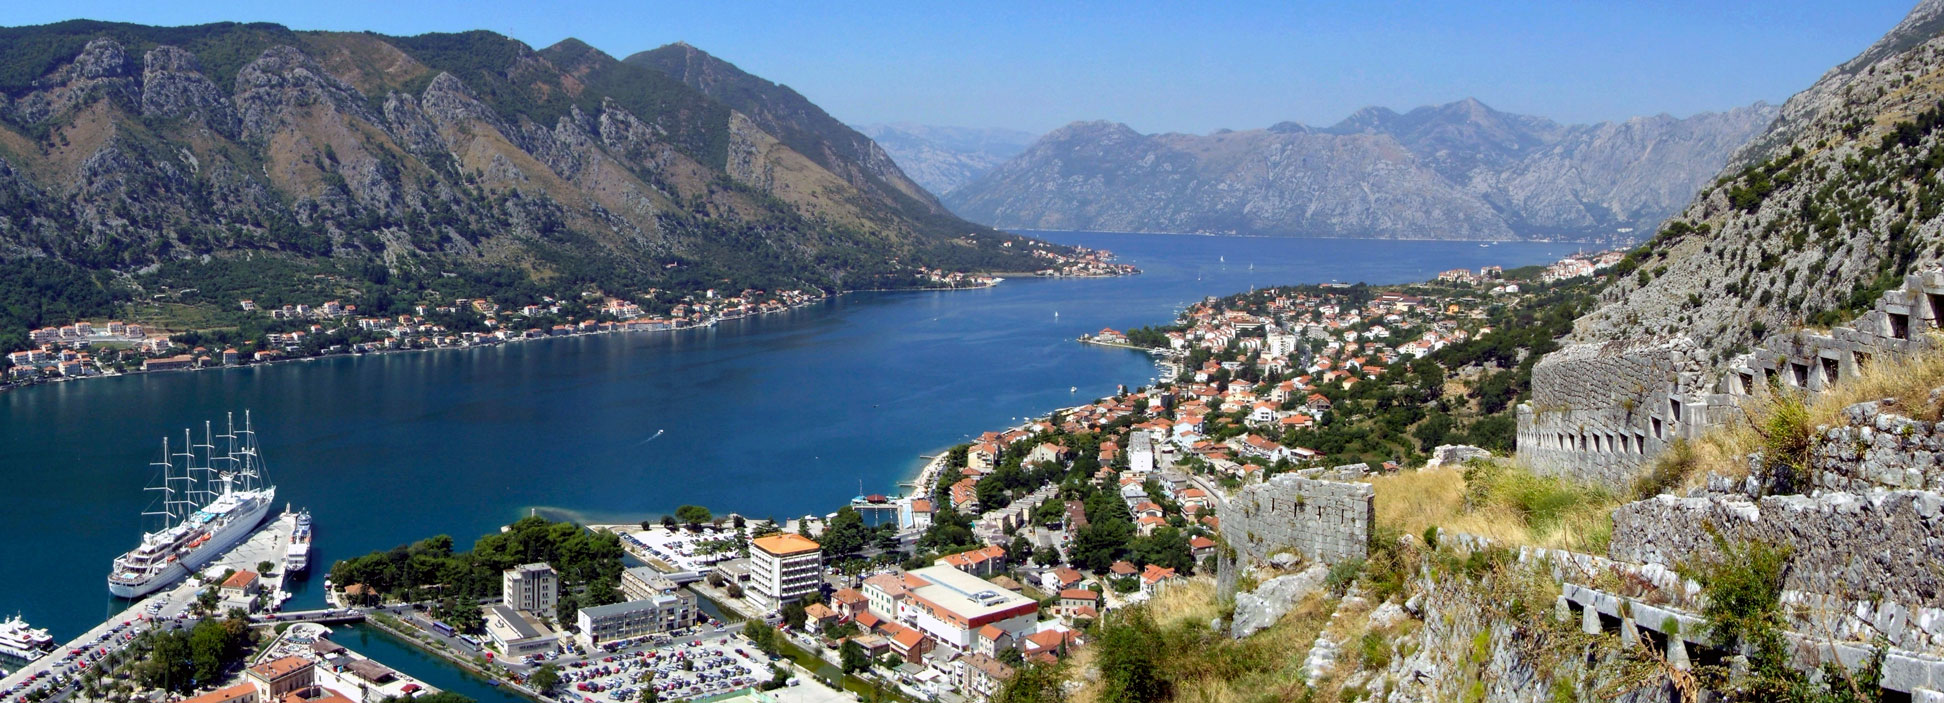 Kotor, an ancient Mediterranean trading port city in the Bay of Kotor in the Adriatic Sea in Montenegro.